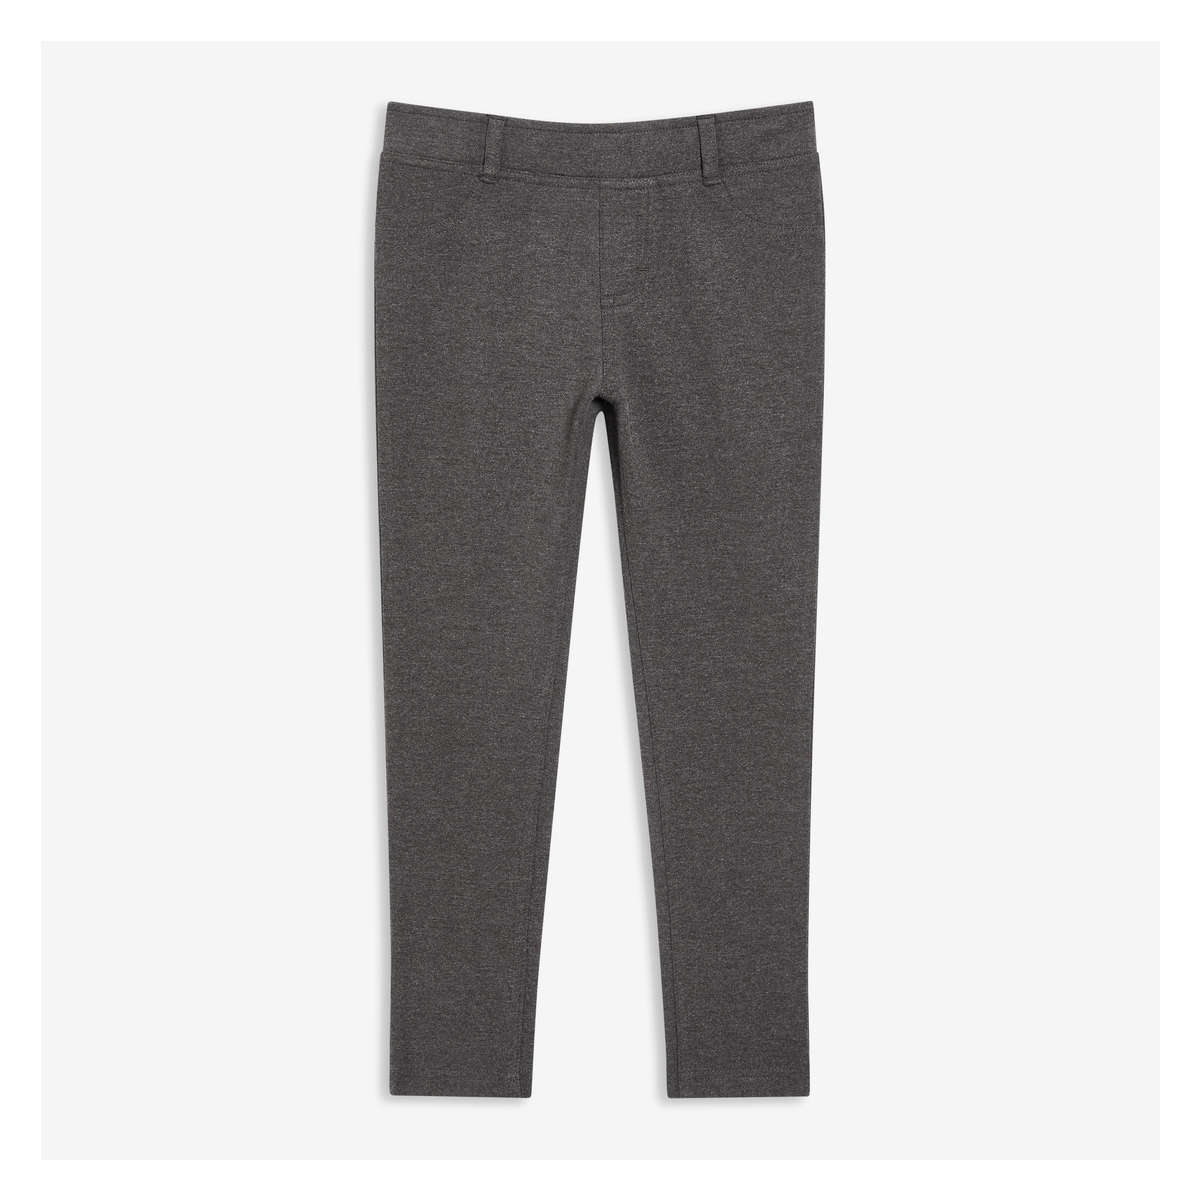 Kid Girls' Terry Pant. in Charcoal from Joe Fresh